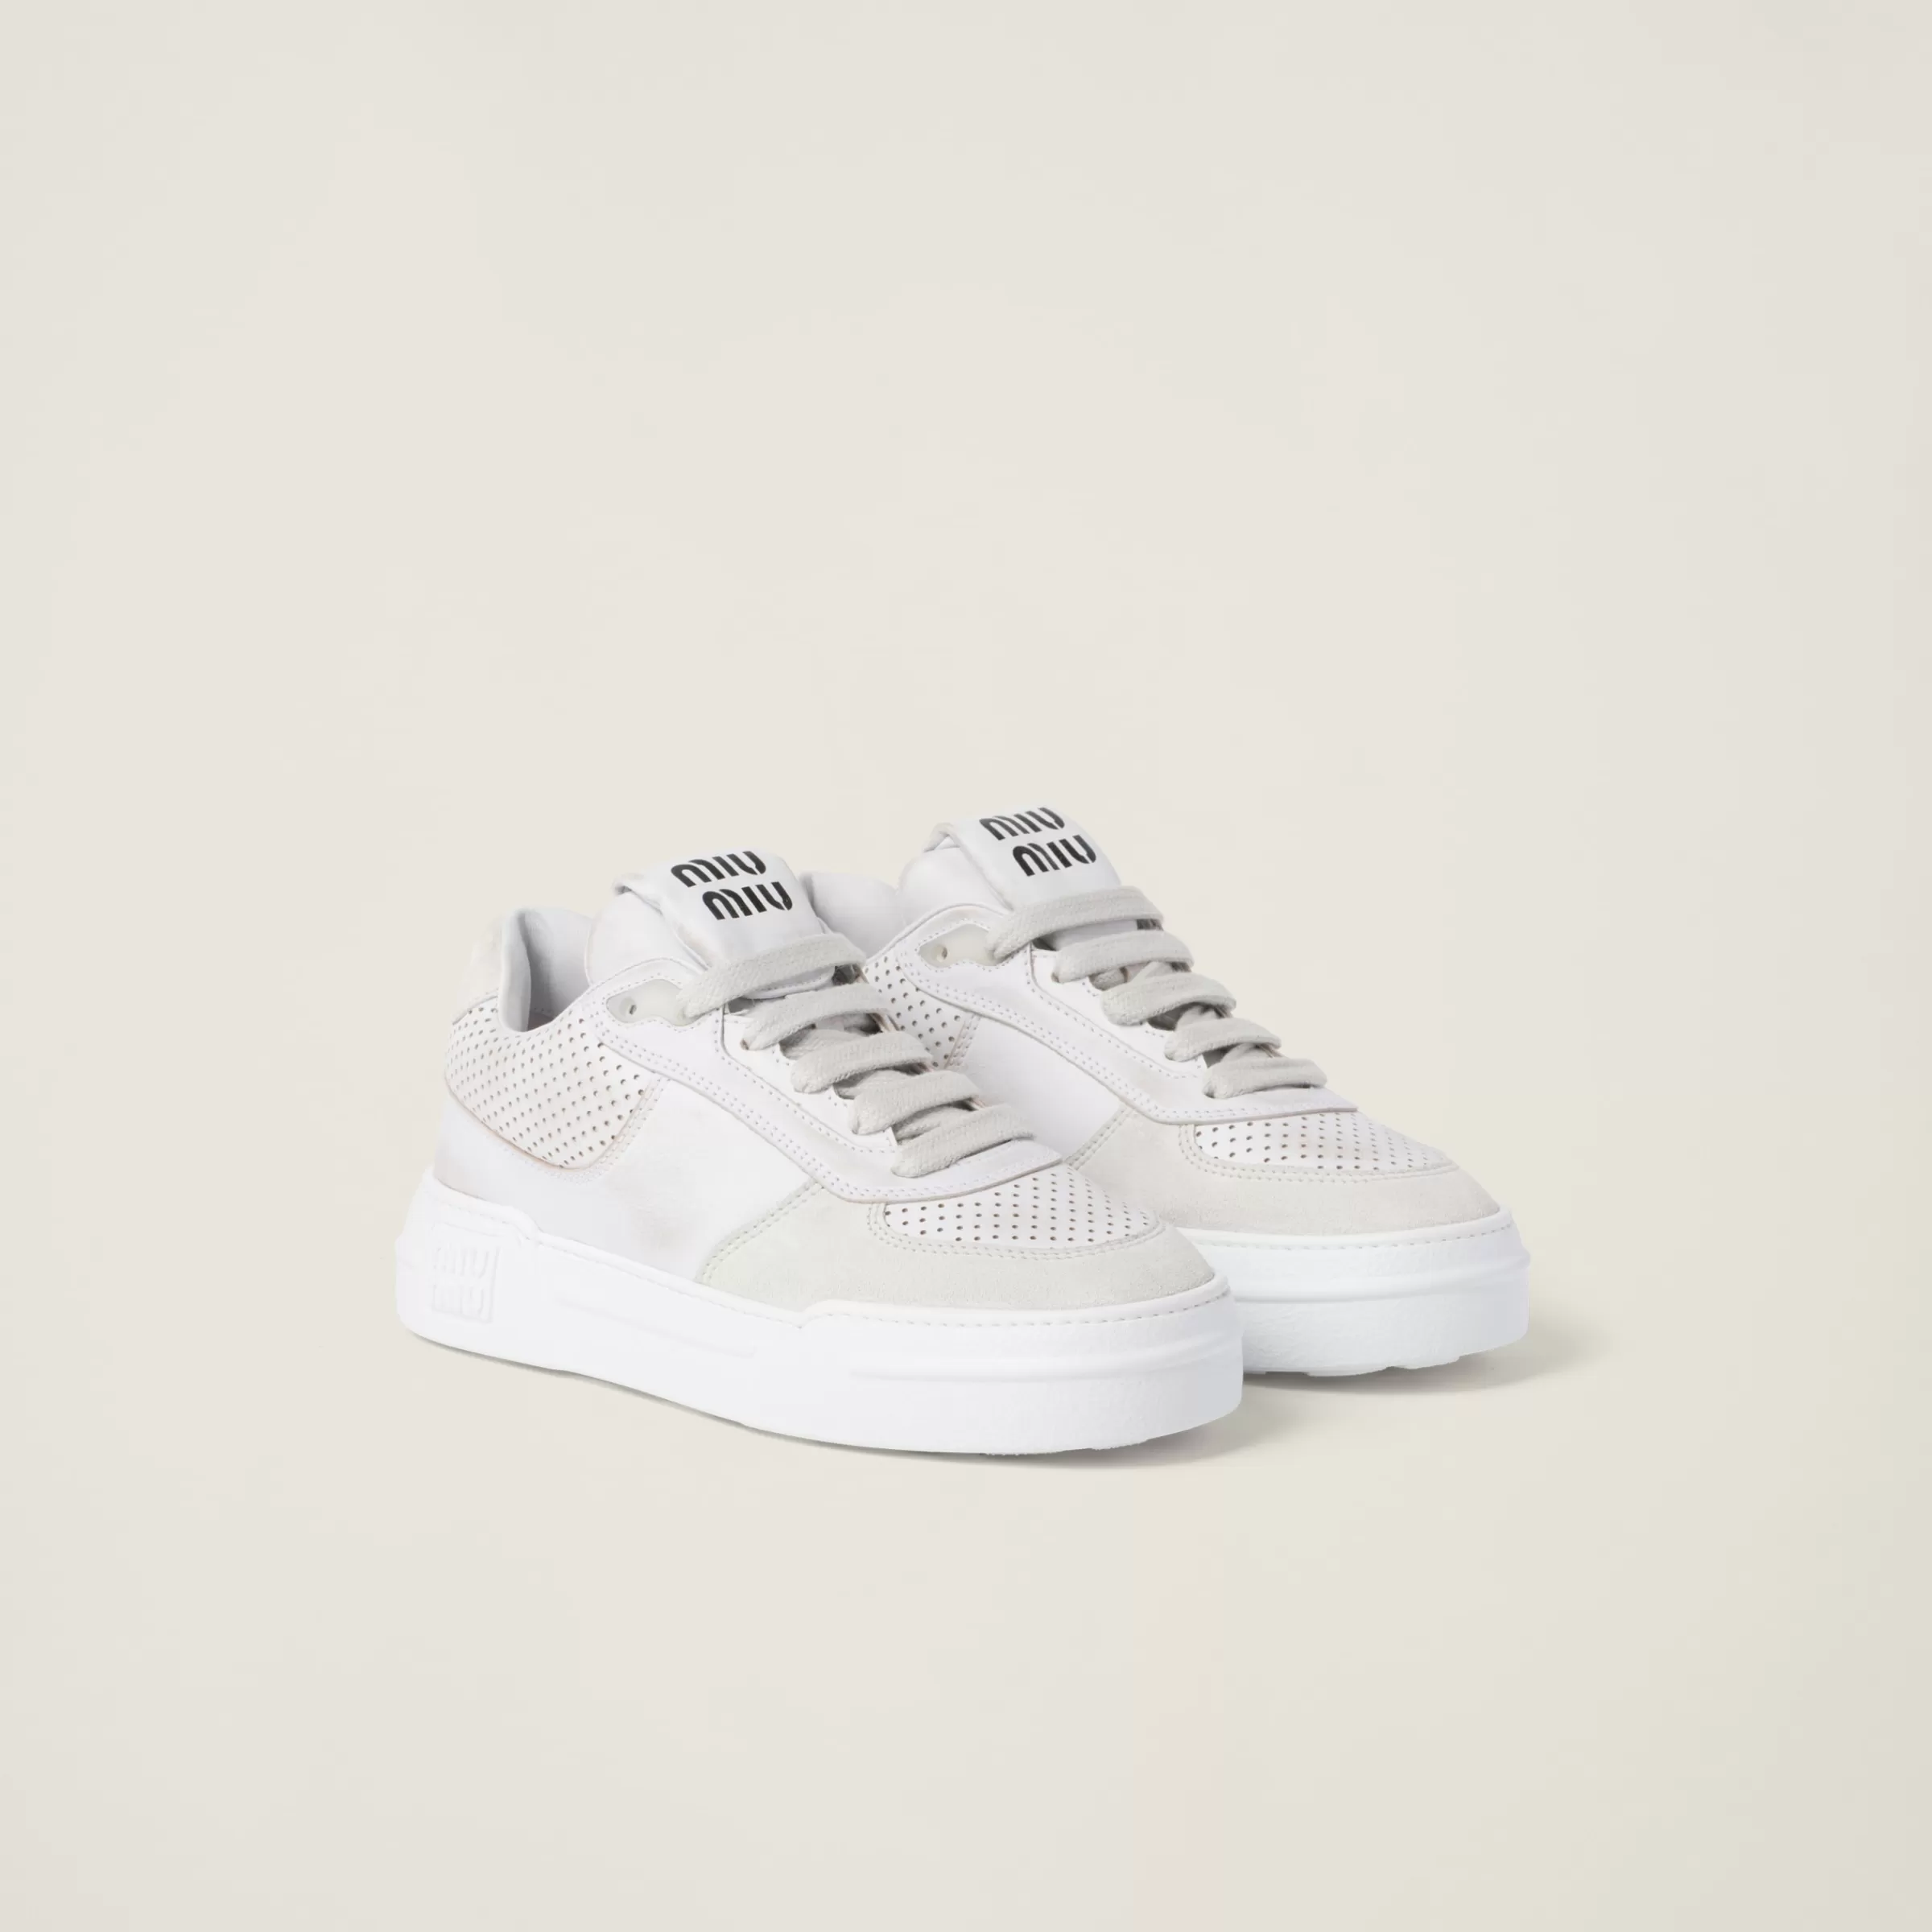 Miu Miu Bleached Leather And Suede Sneakers |